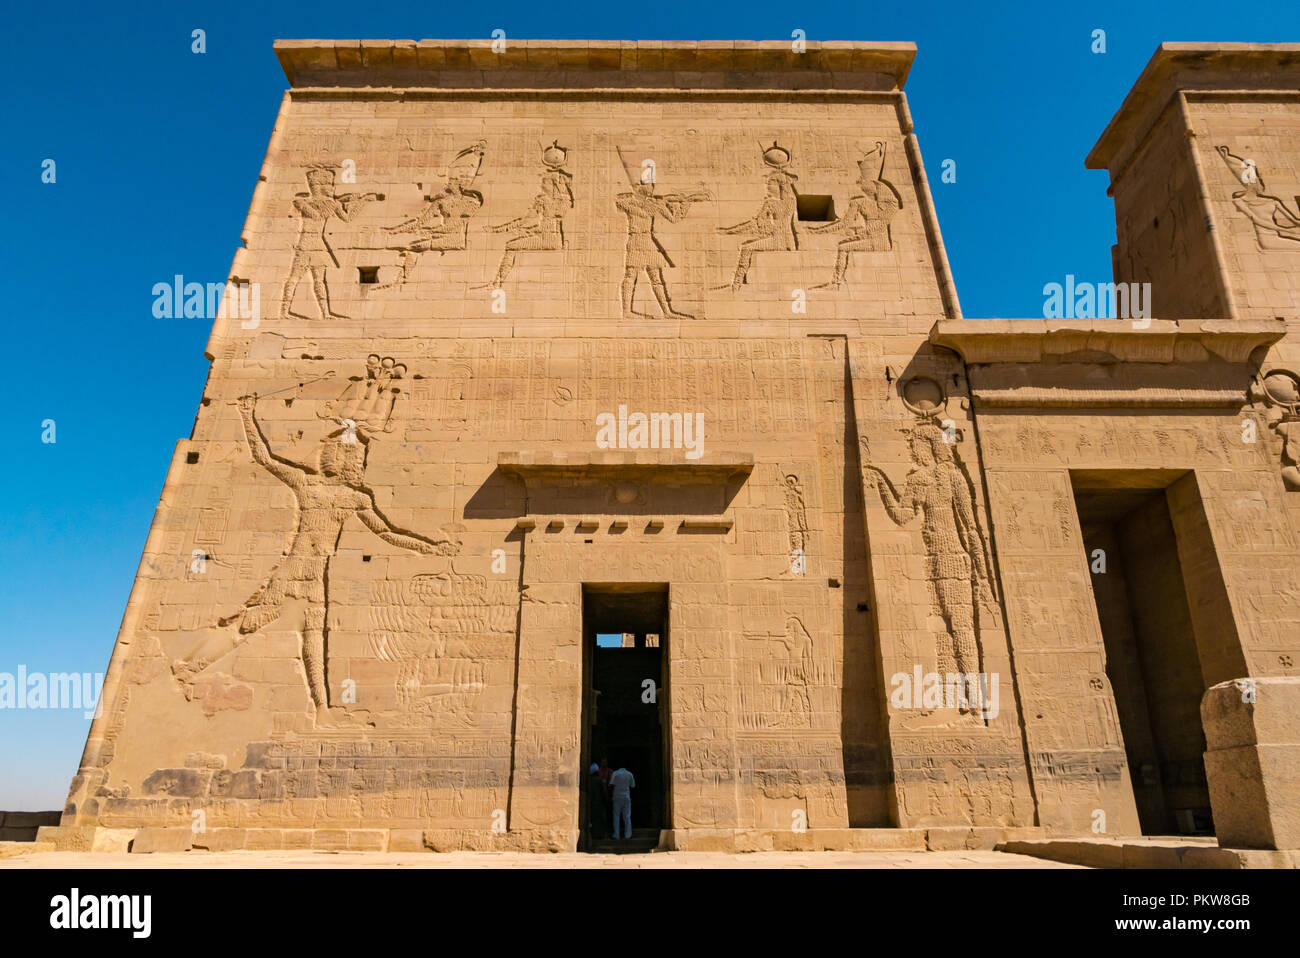 Outer pylon with carved Egyptian figures and hieroglyphs, Temple of Philae, Agilkia Island, River Nile, Aswan, Egypt, Africa Stock Photo